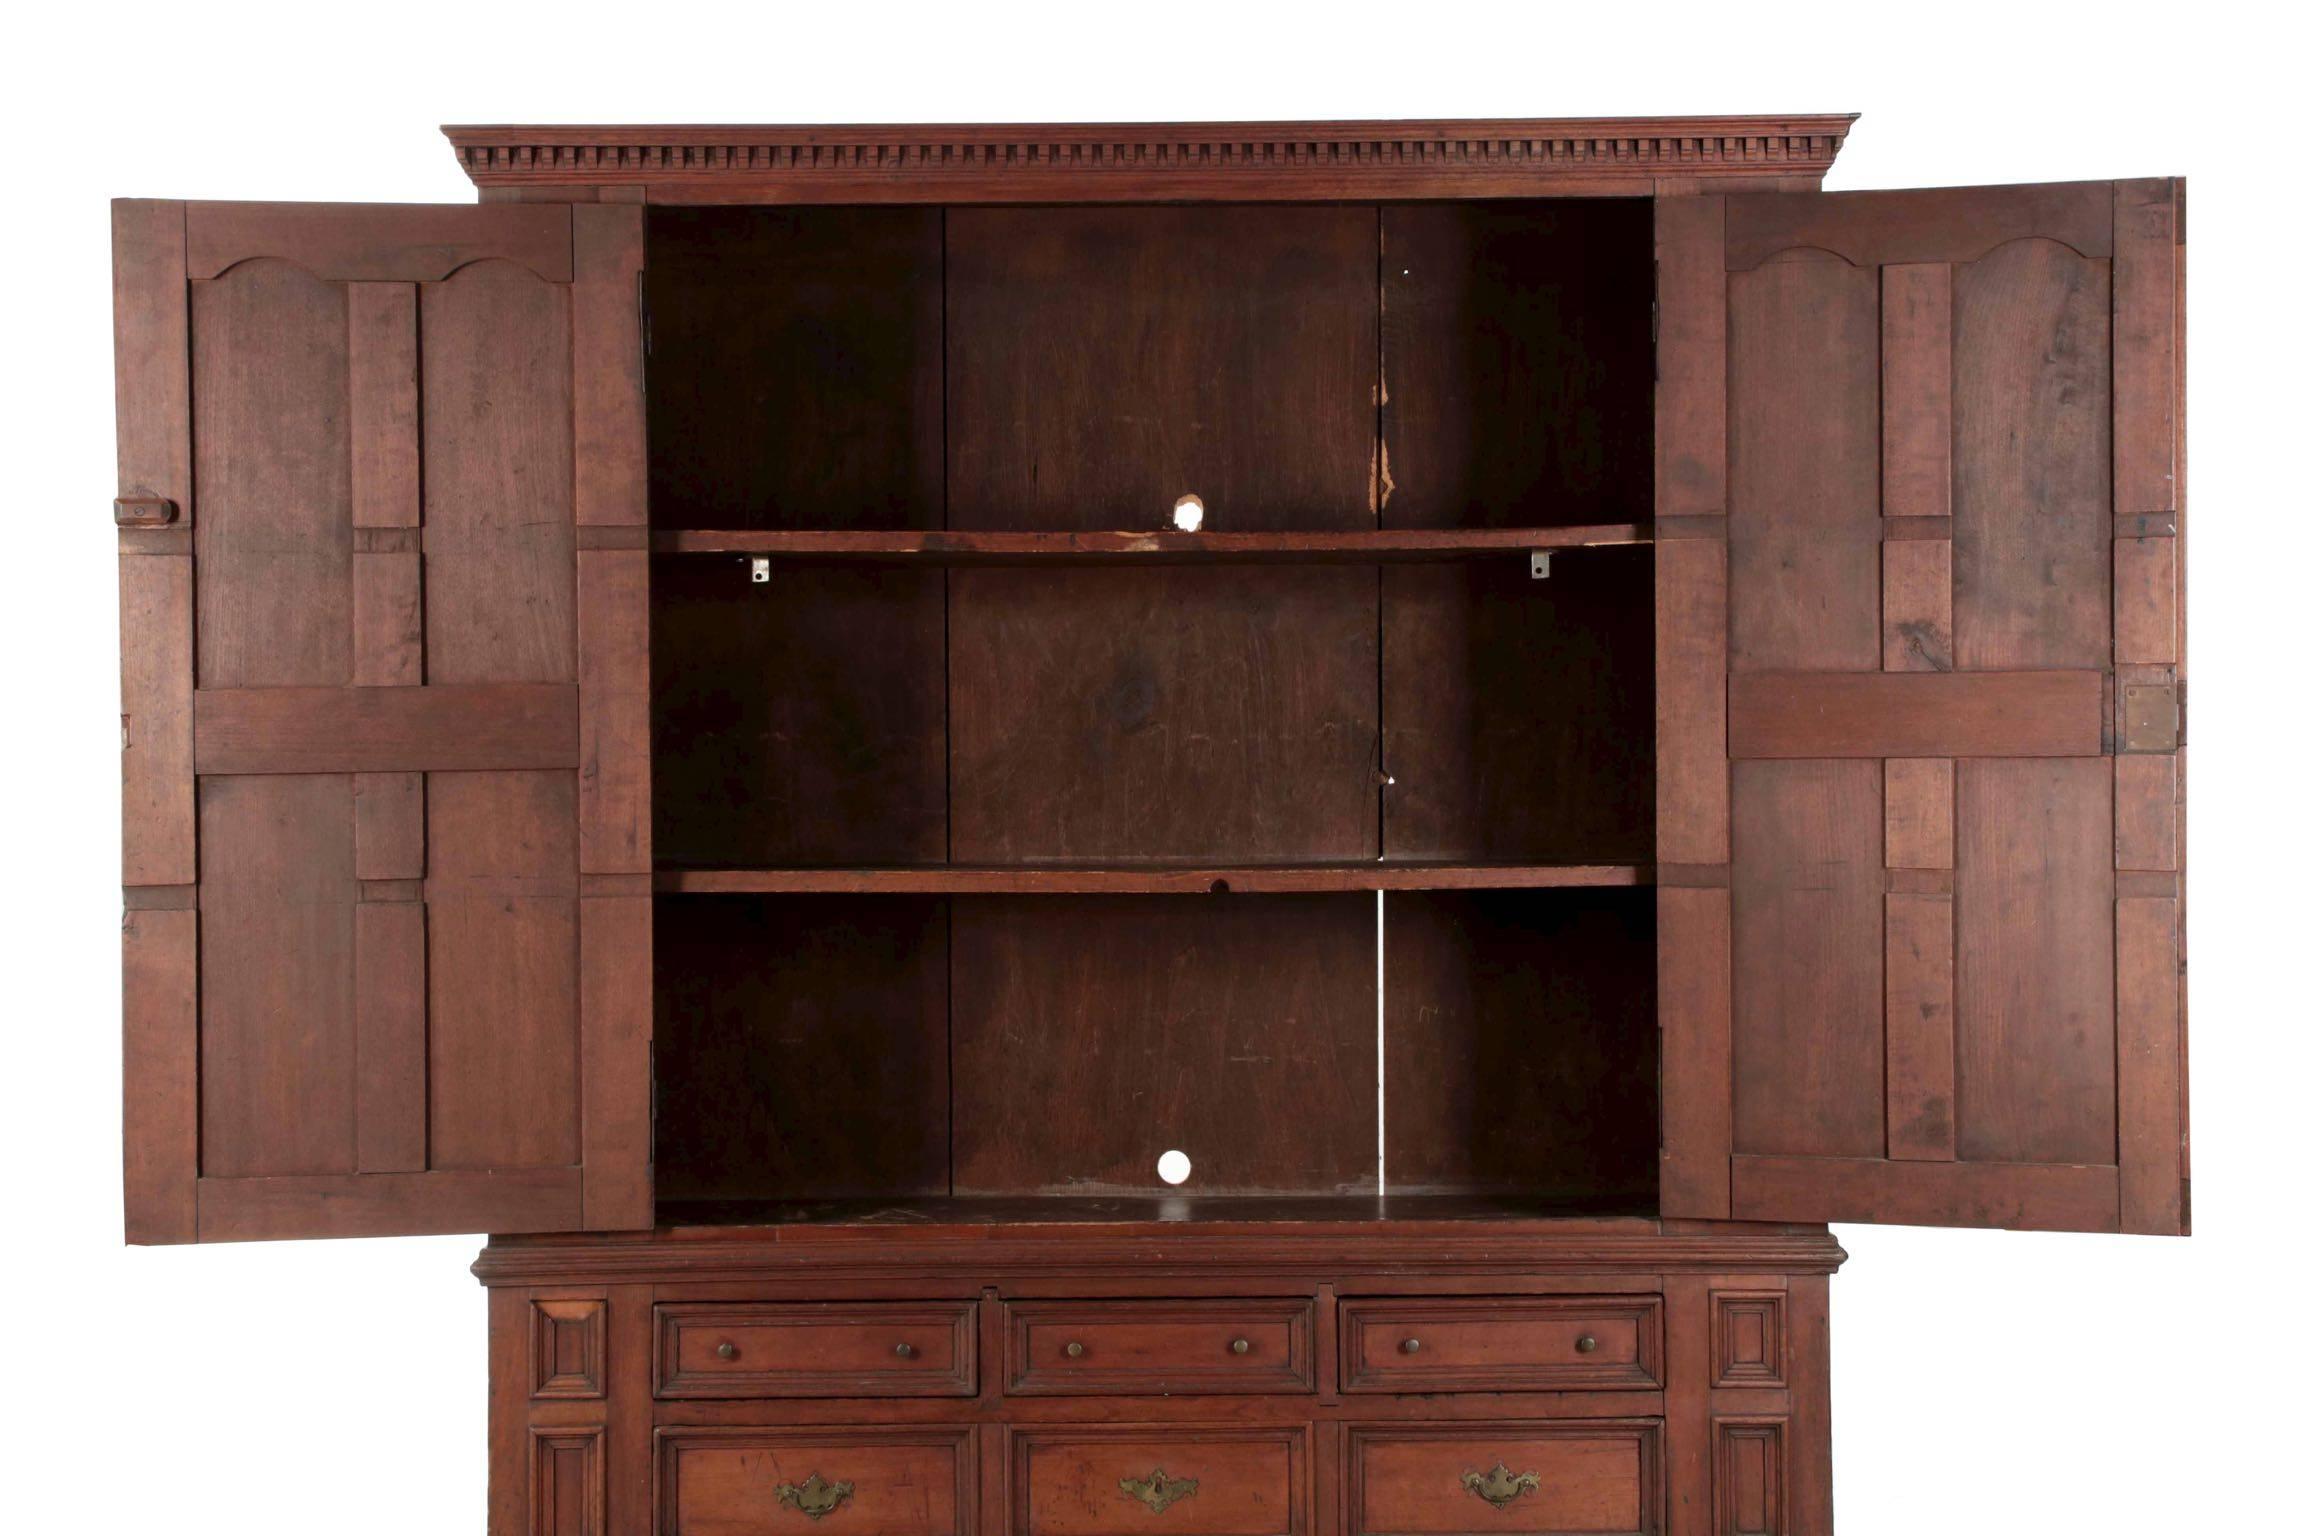 A powerful architectural object, this Fine shrank with tombstone door panels was crafted of solid cherry primary woods, probably in Pennsylvania during the last quarter of the 18th century. The piece is built as a single unit, not breaking down or